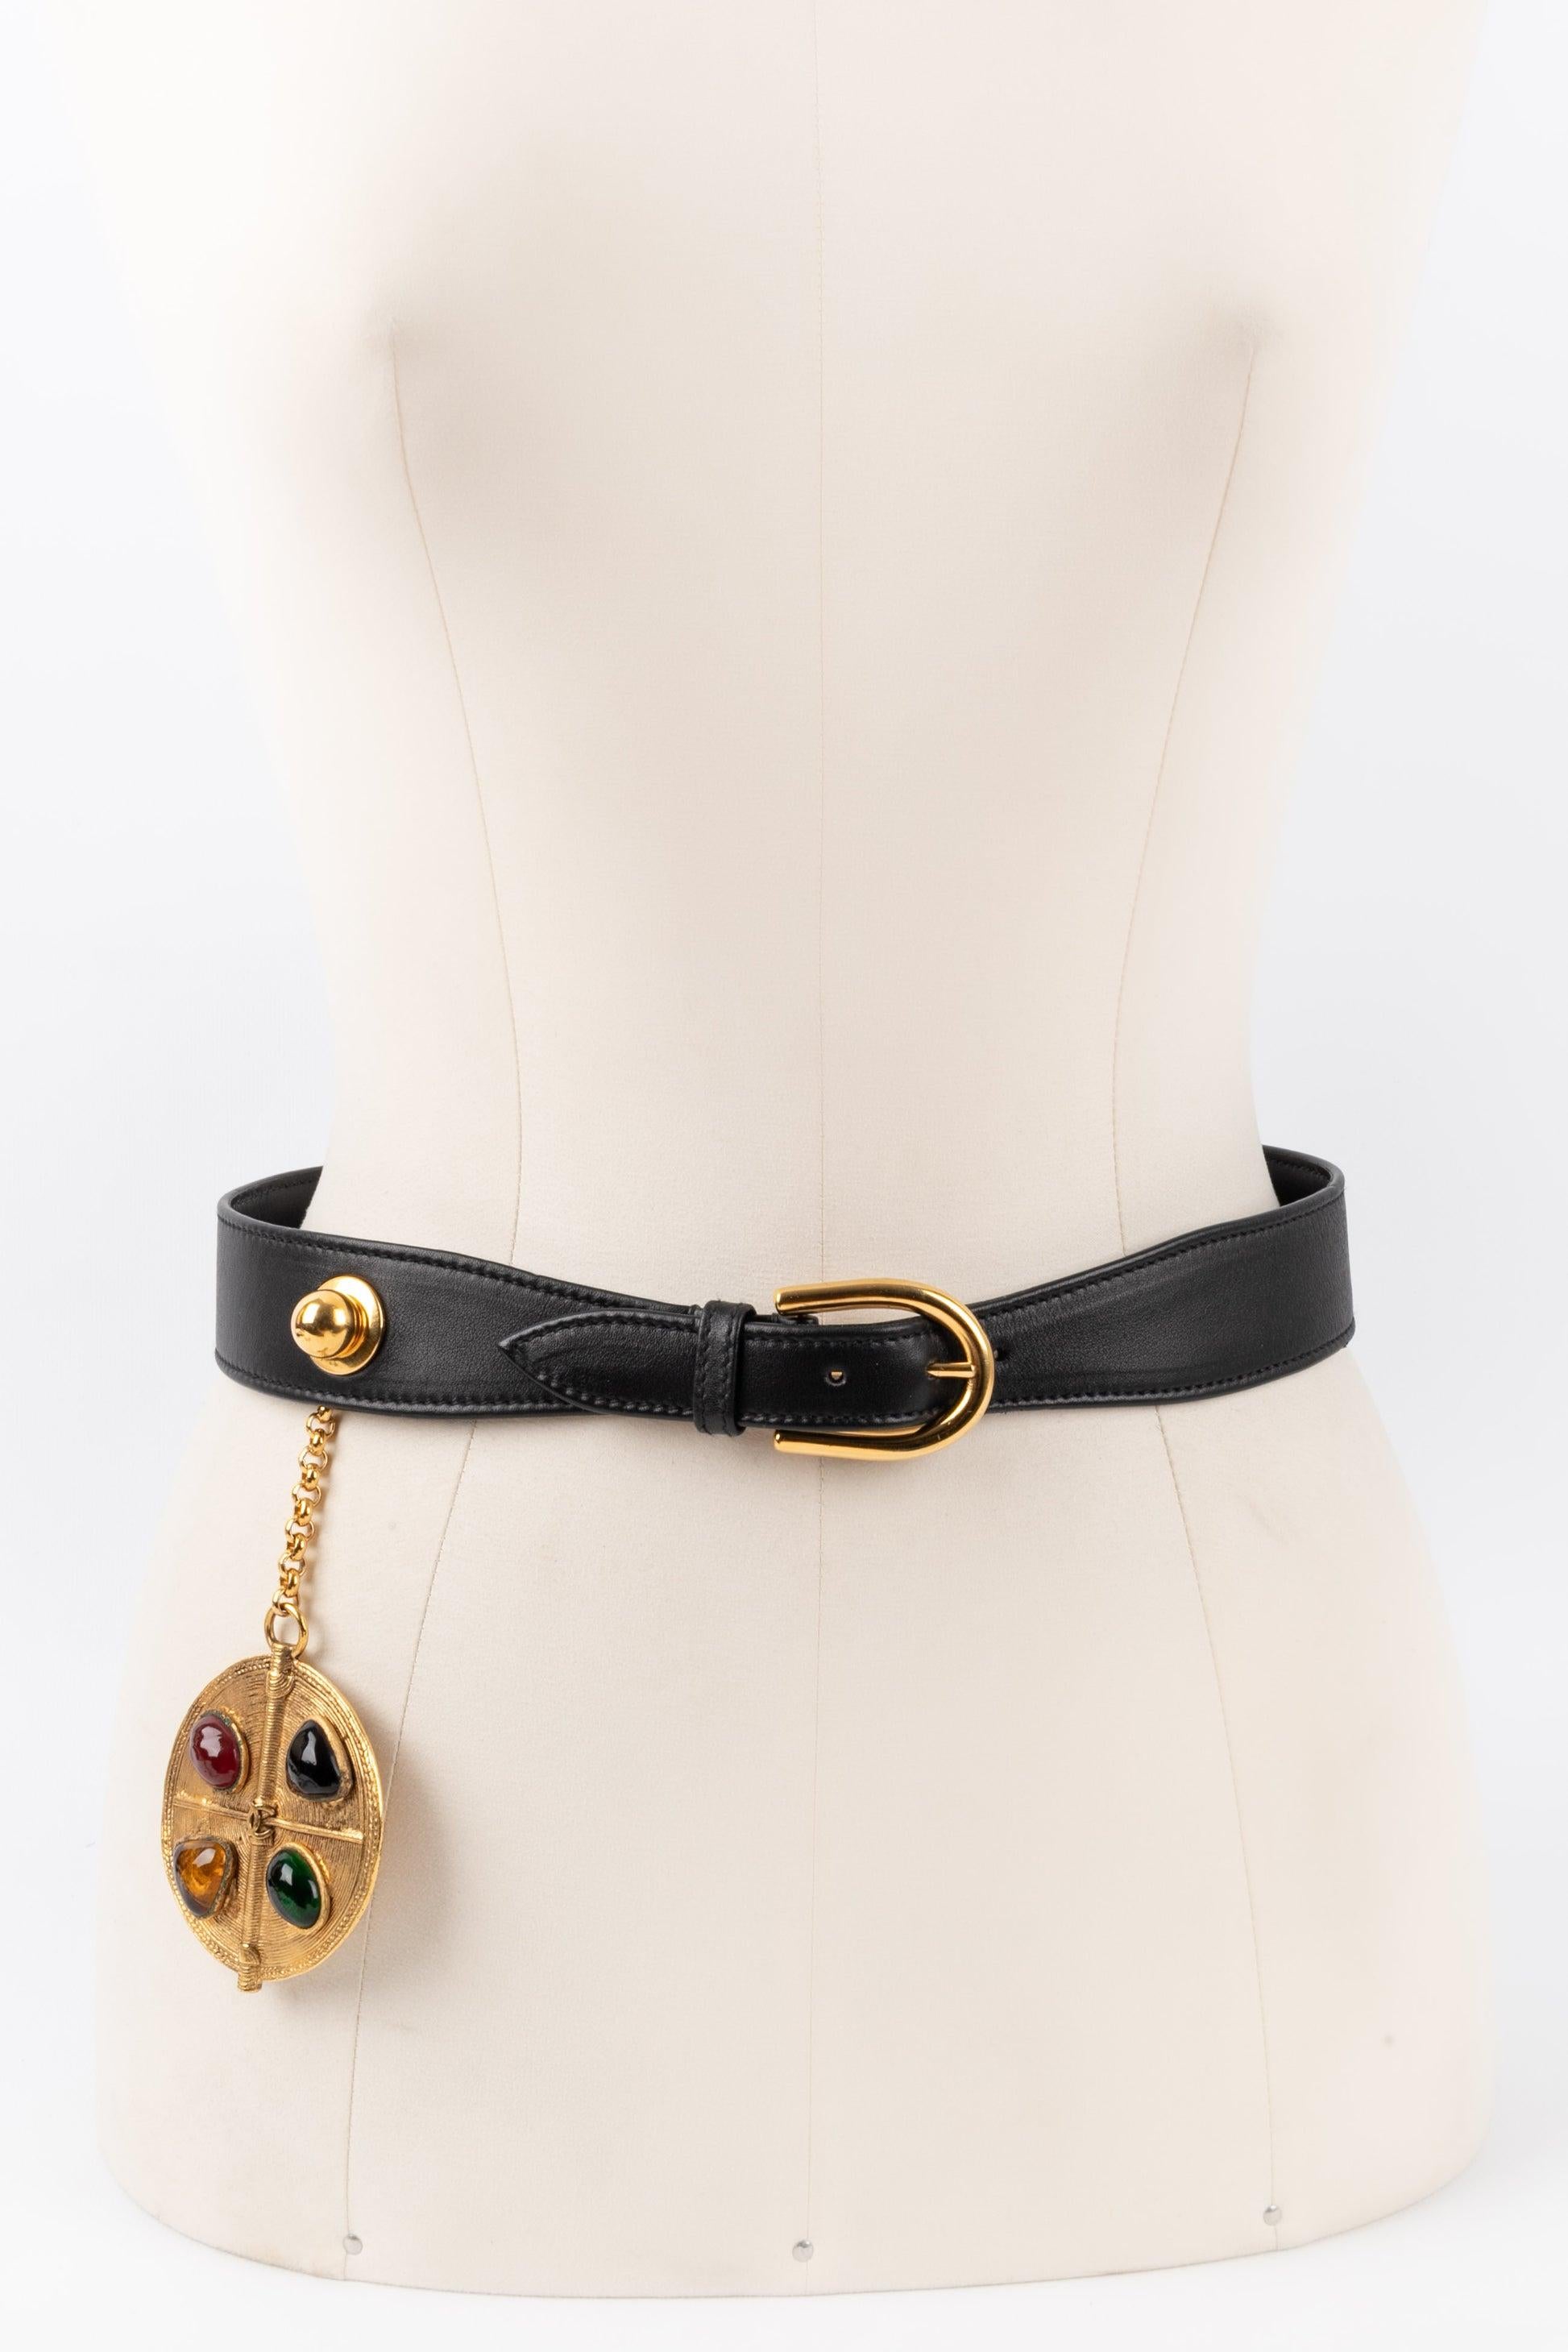 Chanel - (Made in France) Leather belt with a golden metal buckle and a jewelry charm ornamented with glass paste cabochons.

Additional information:
Condition: Very good condition
Dimensions: Size 70

Seller Reference: CCB99